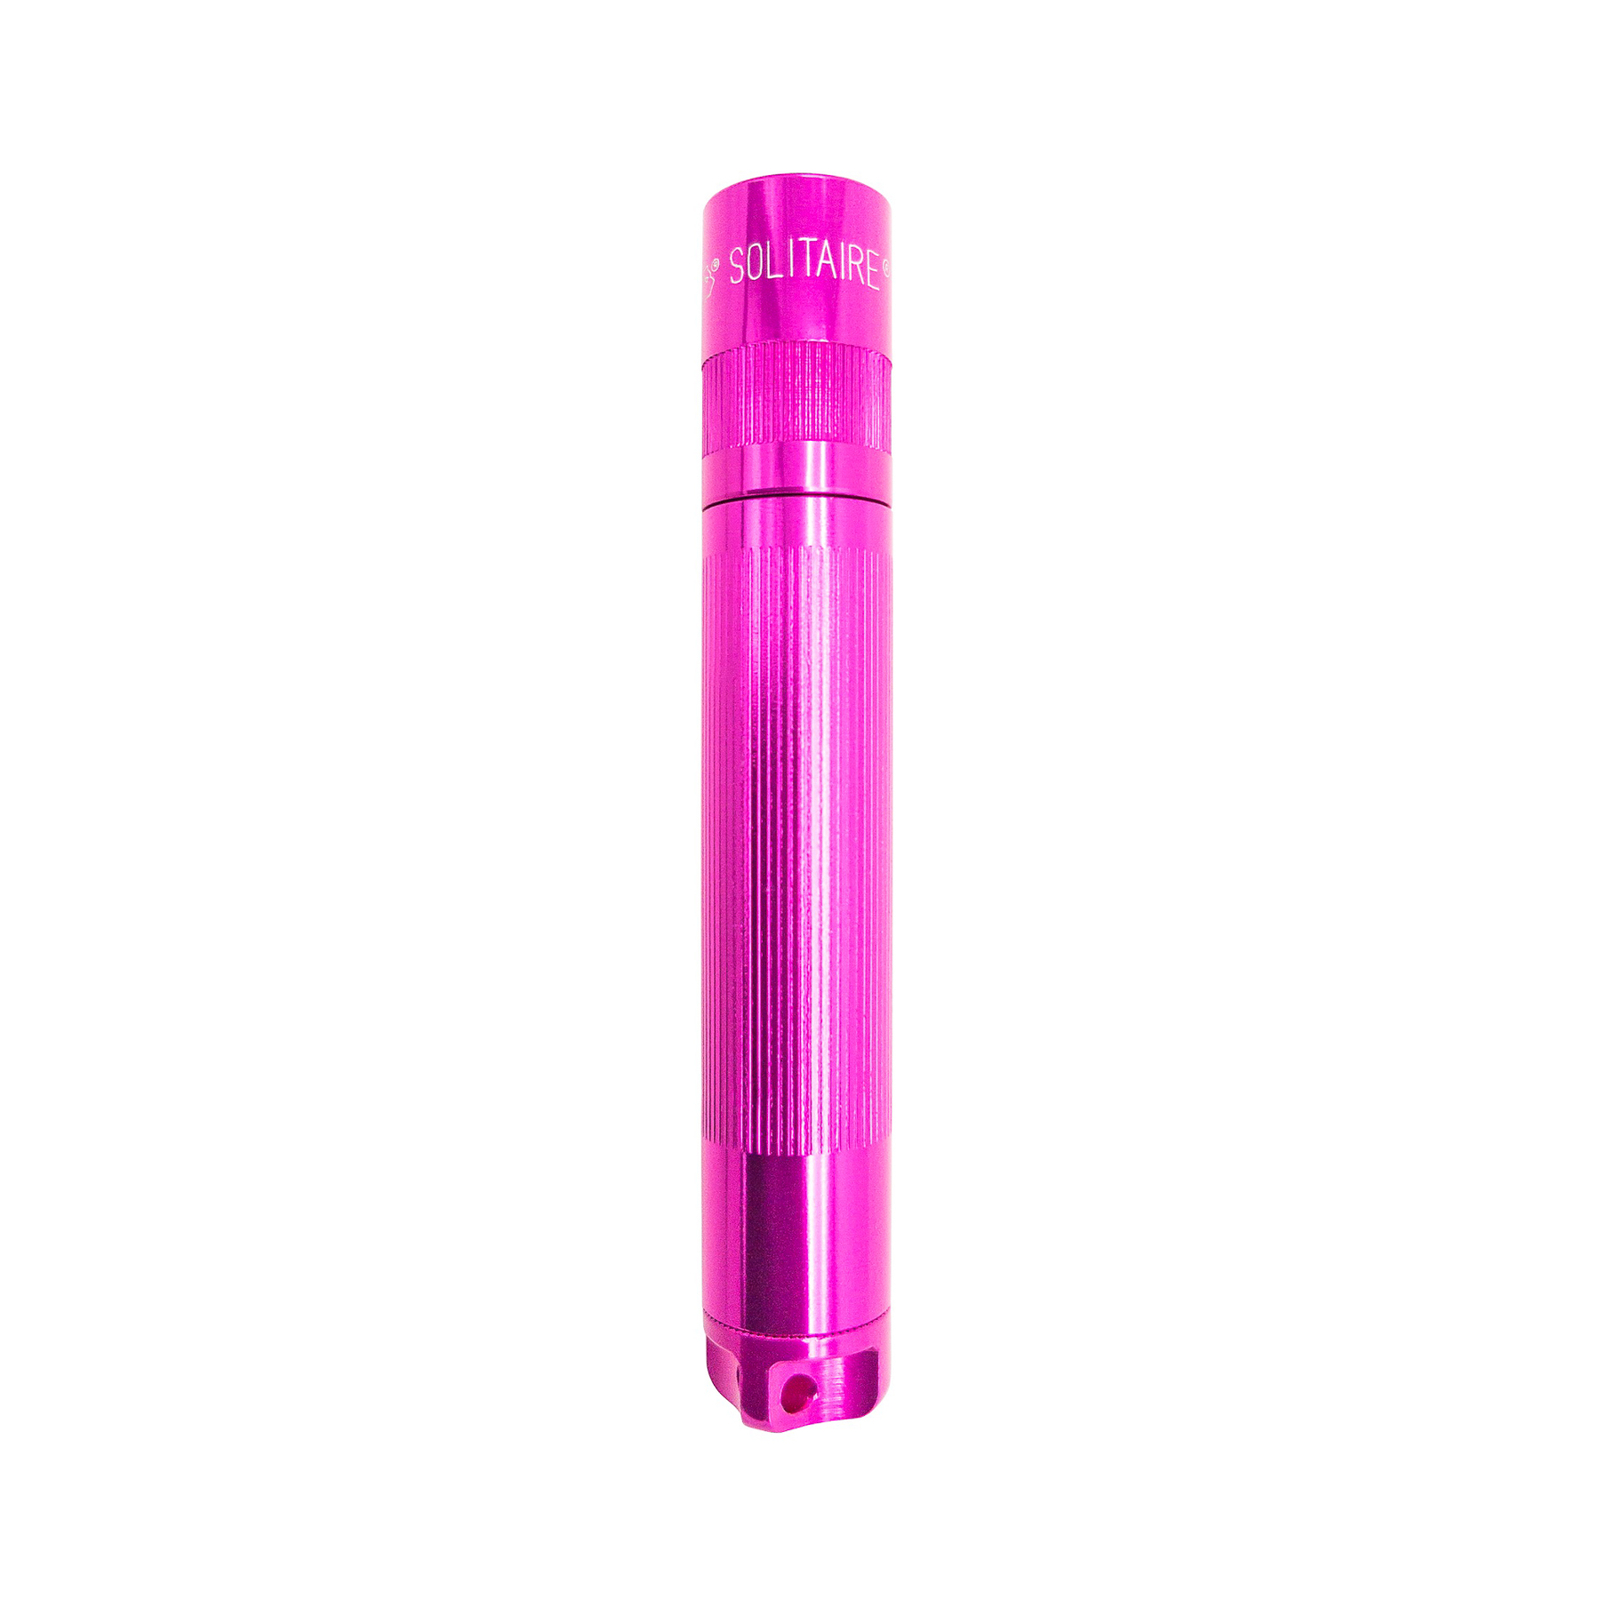 Maglite lampe de poche LED Solitaire, 1-Cell AAA, rose